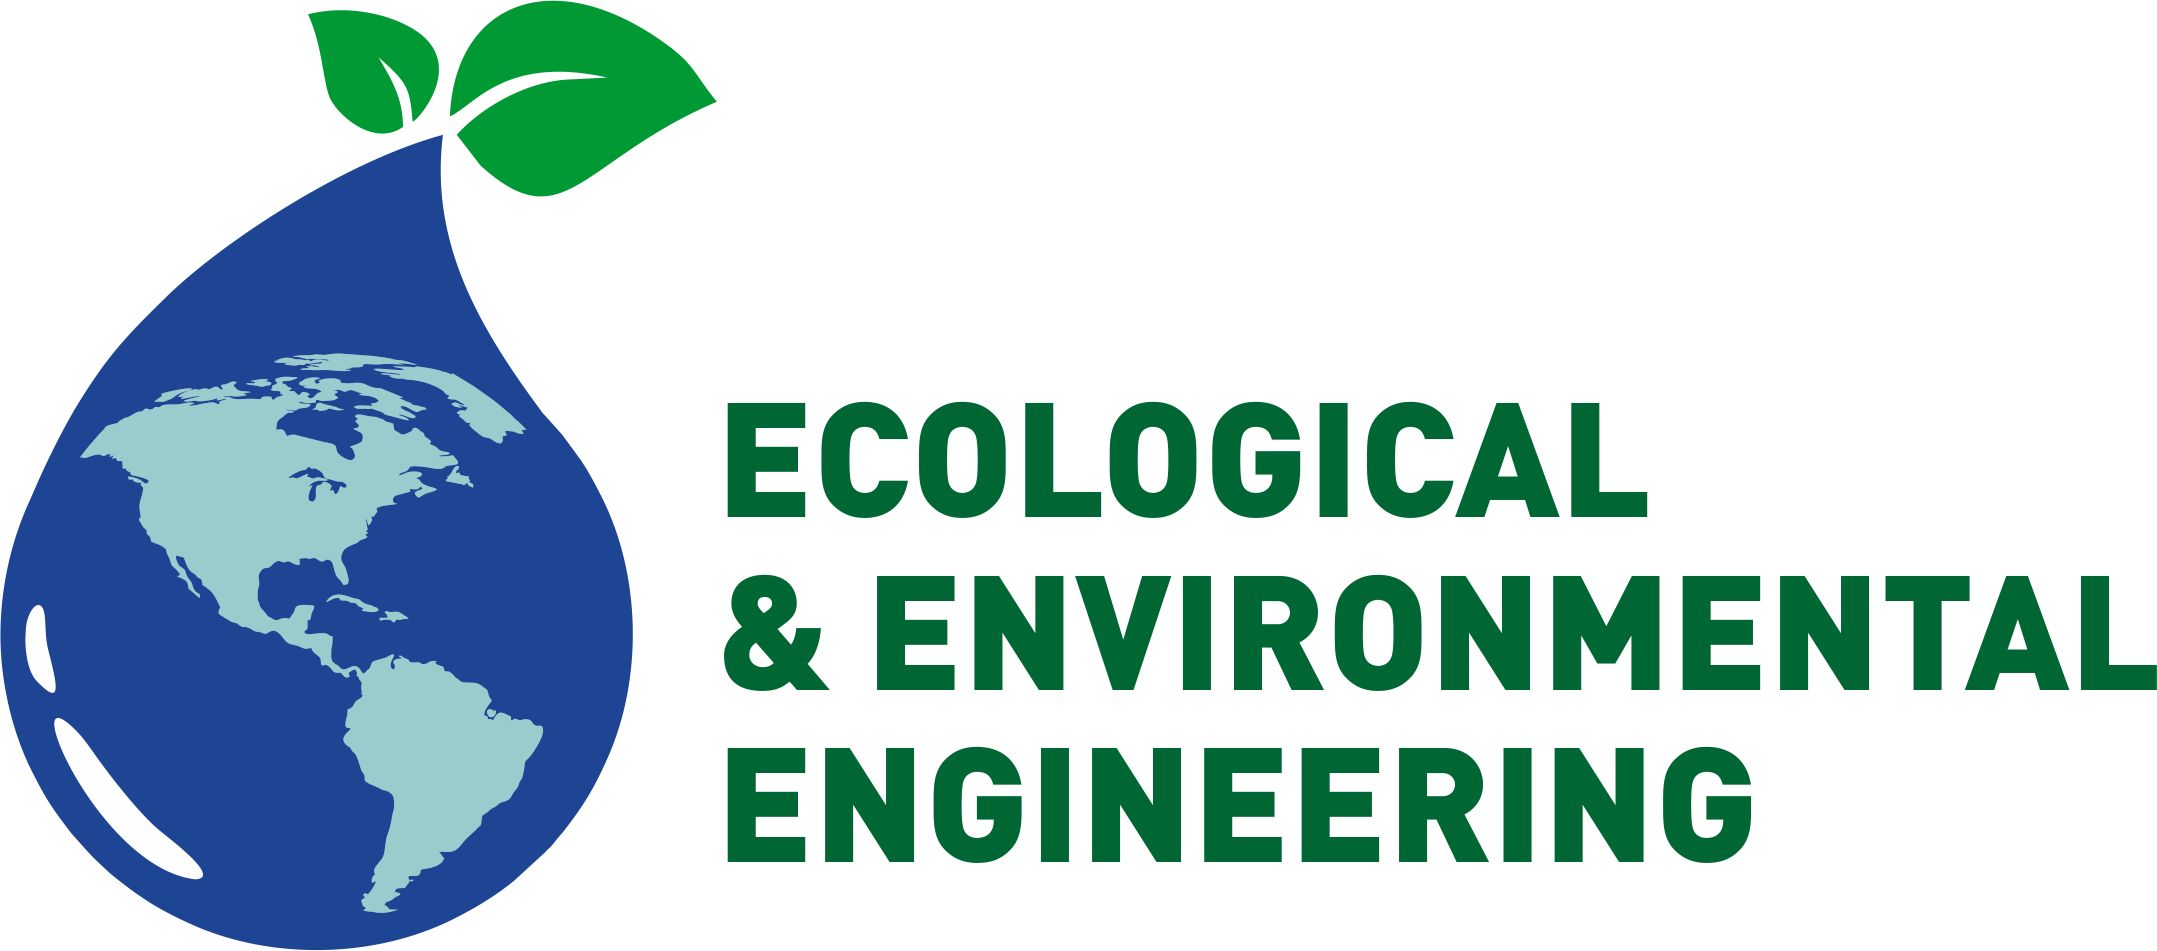 Conference on Ecological and Environmental Engineering 